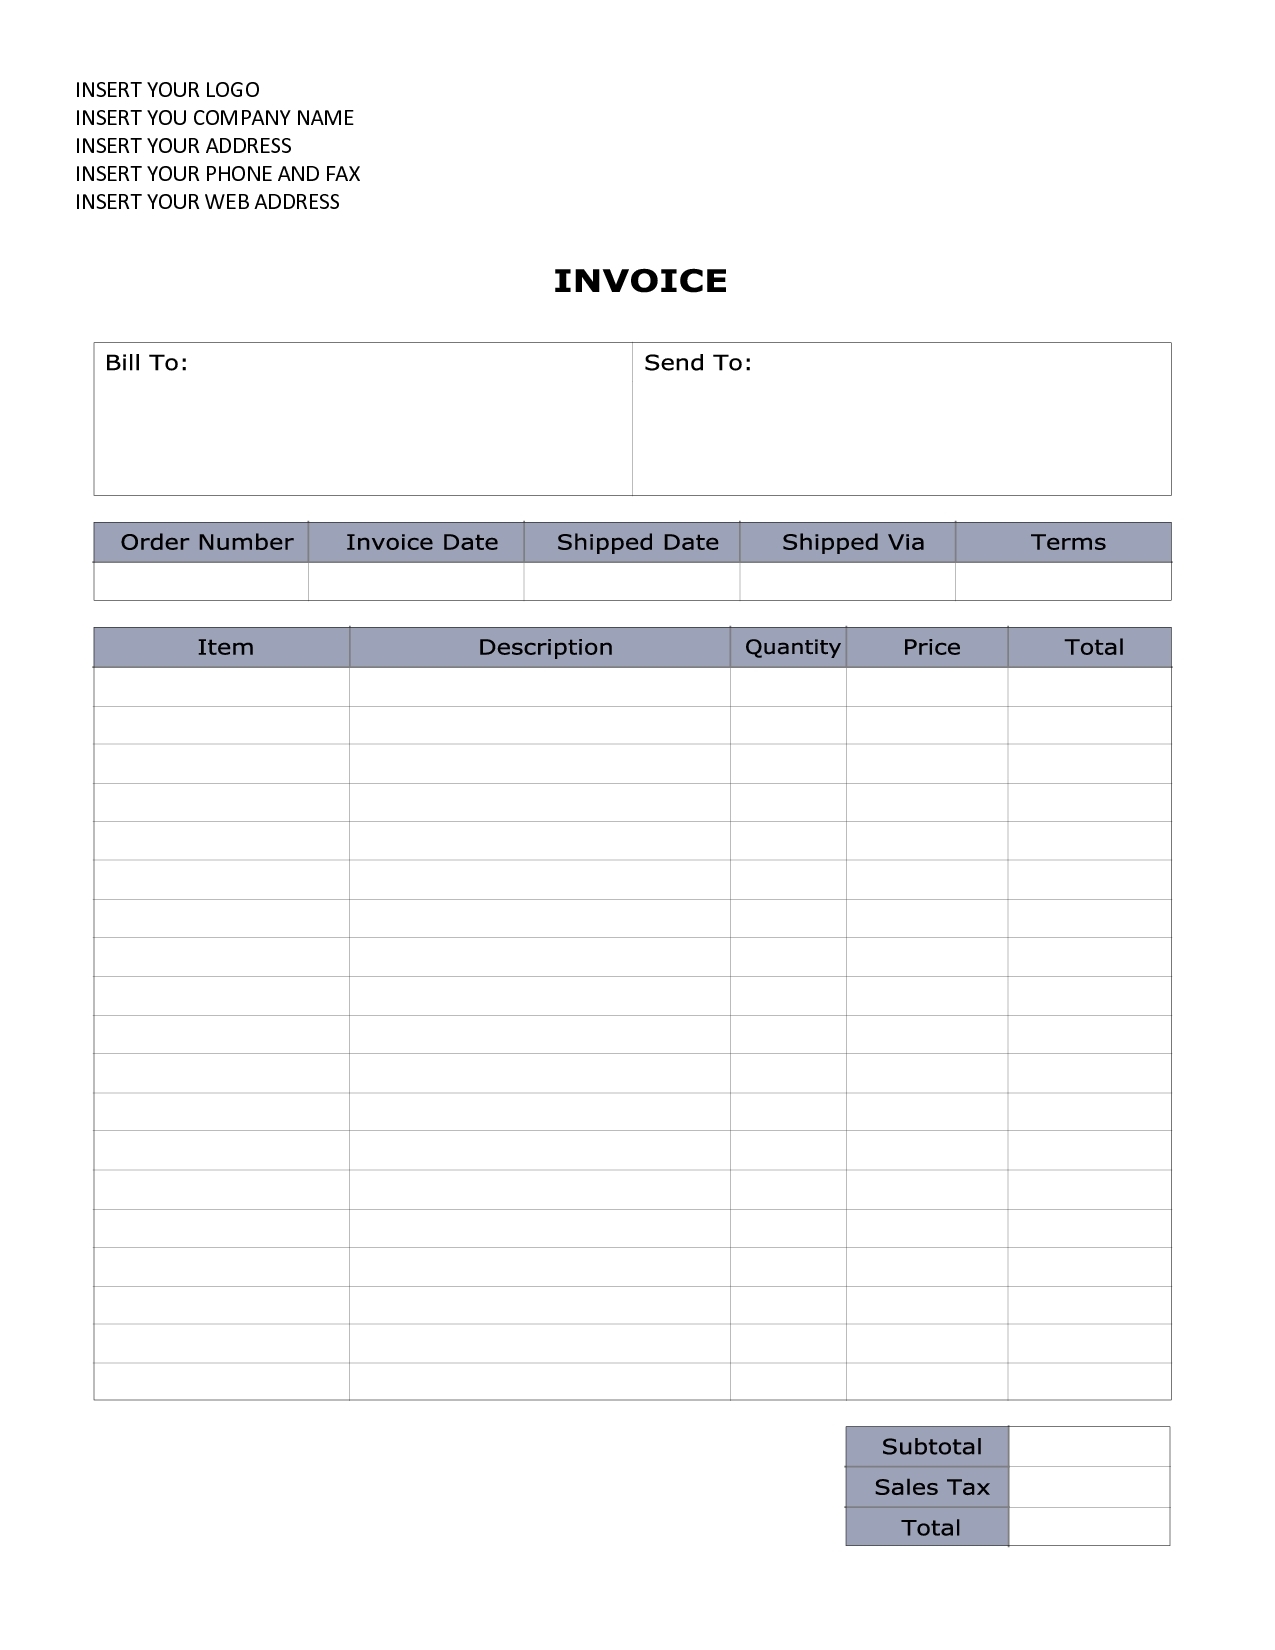 invoice template word invoice template free 2016 invoice samples word